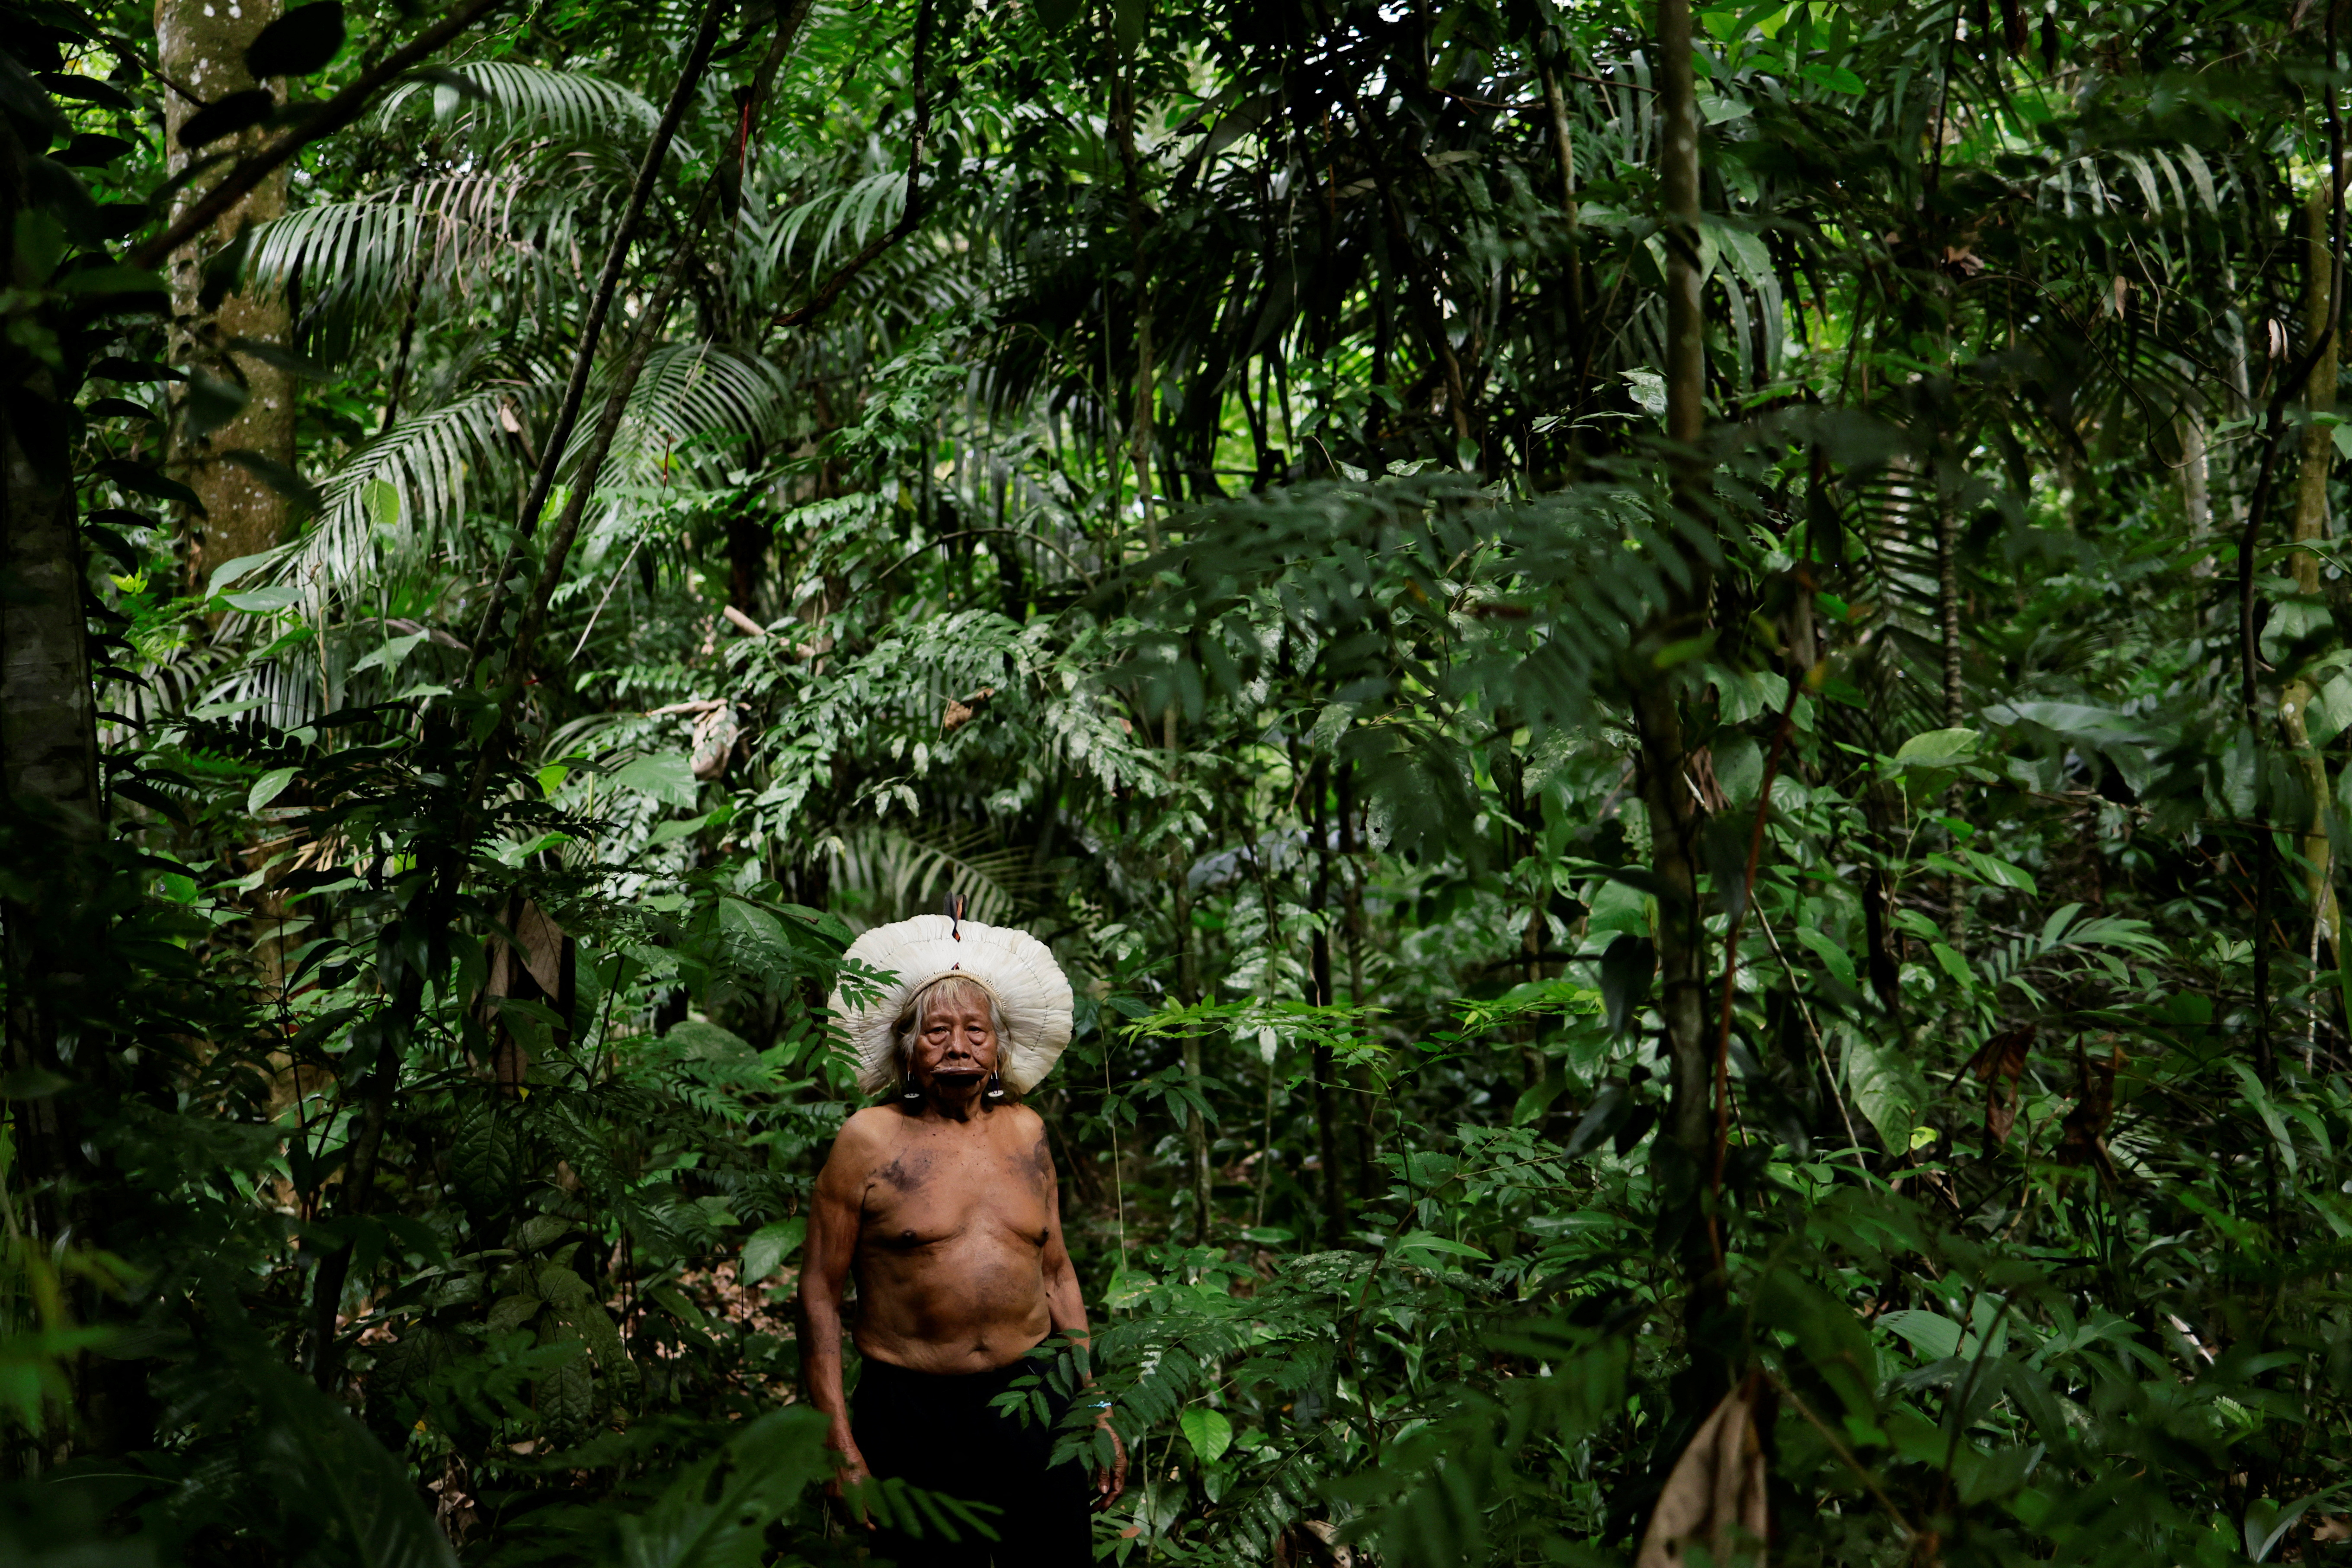 Exclusive:  Indigenous chief Raoni warns of disaster if deforestation  not stopped